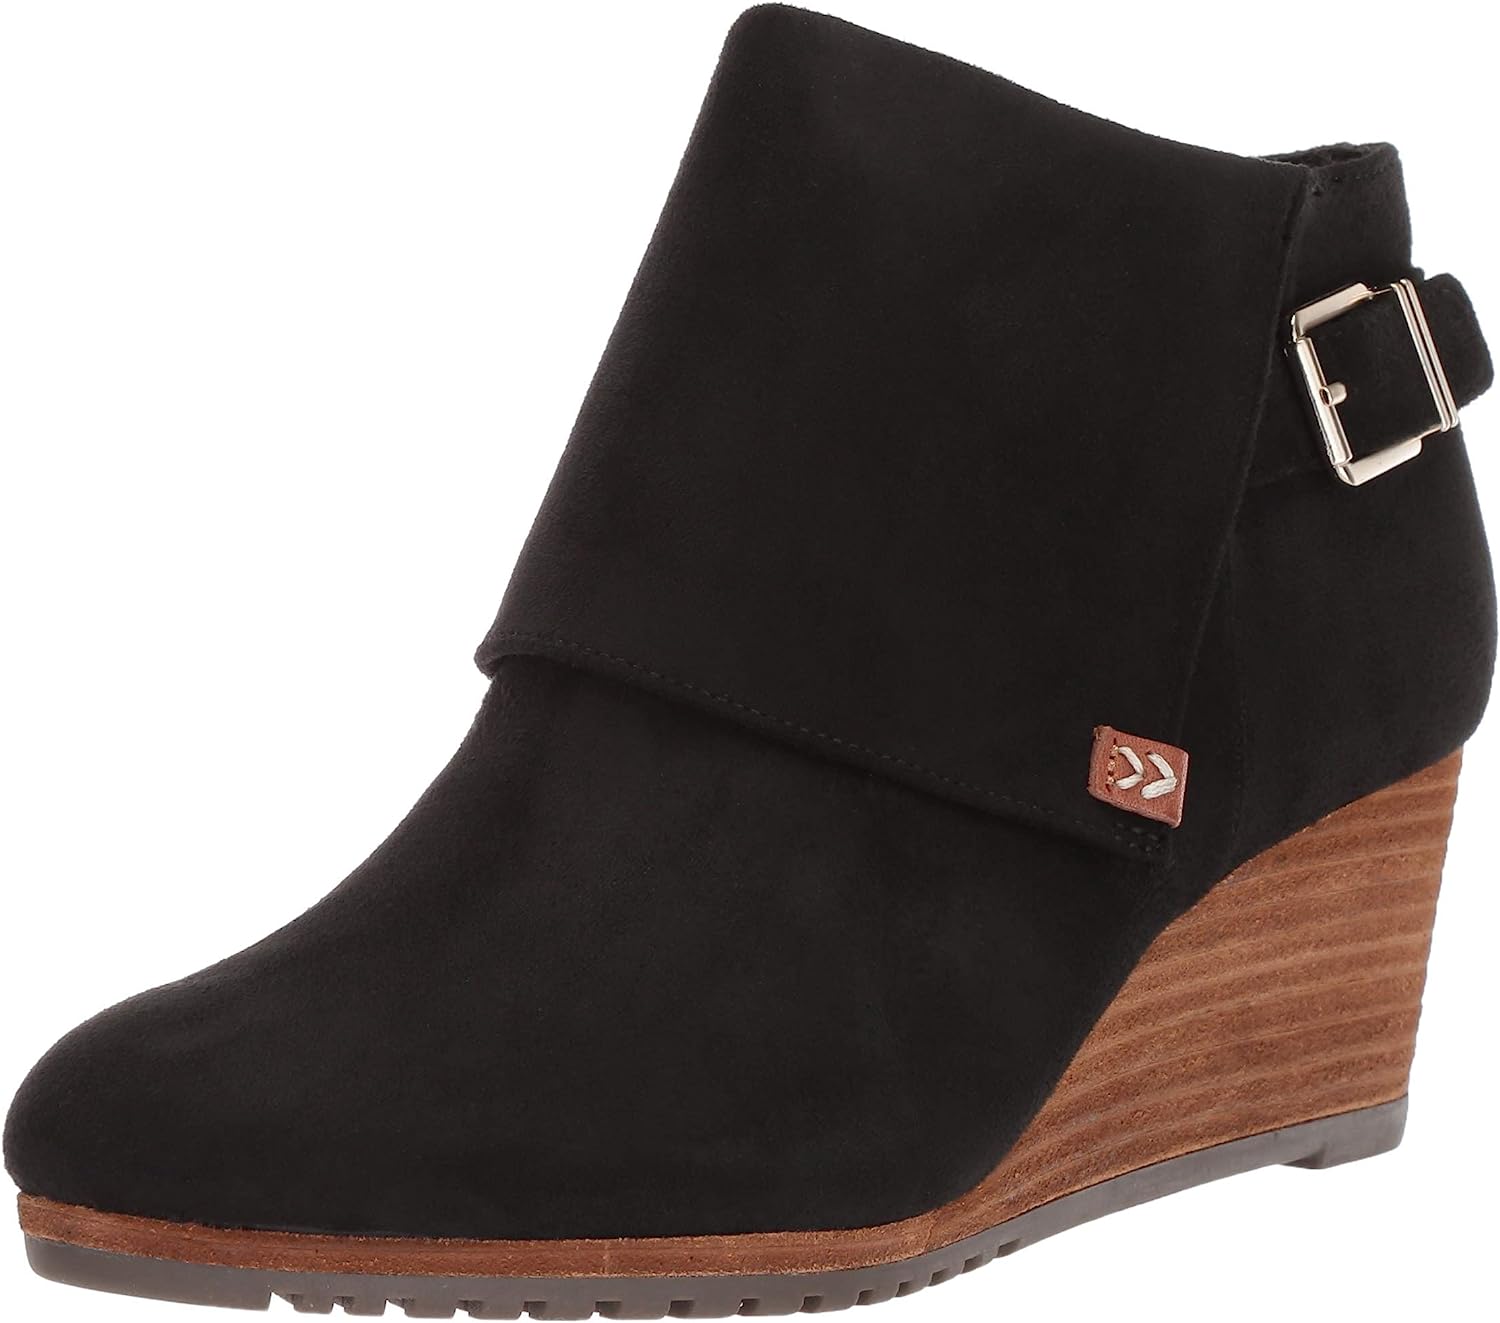 Dr. Scholl's Shoes Women's Create Ankle Boot